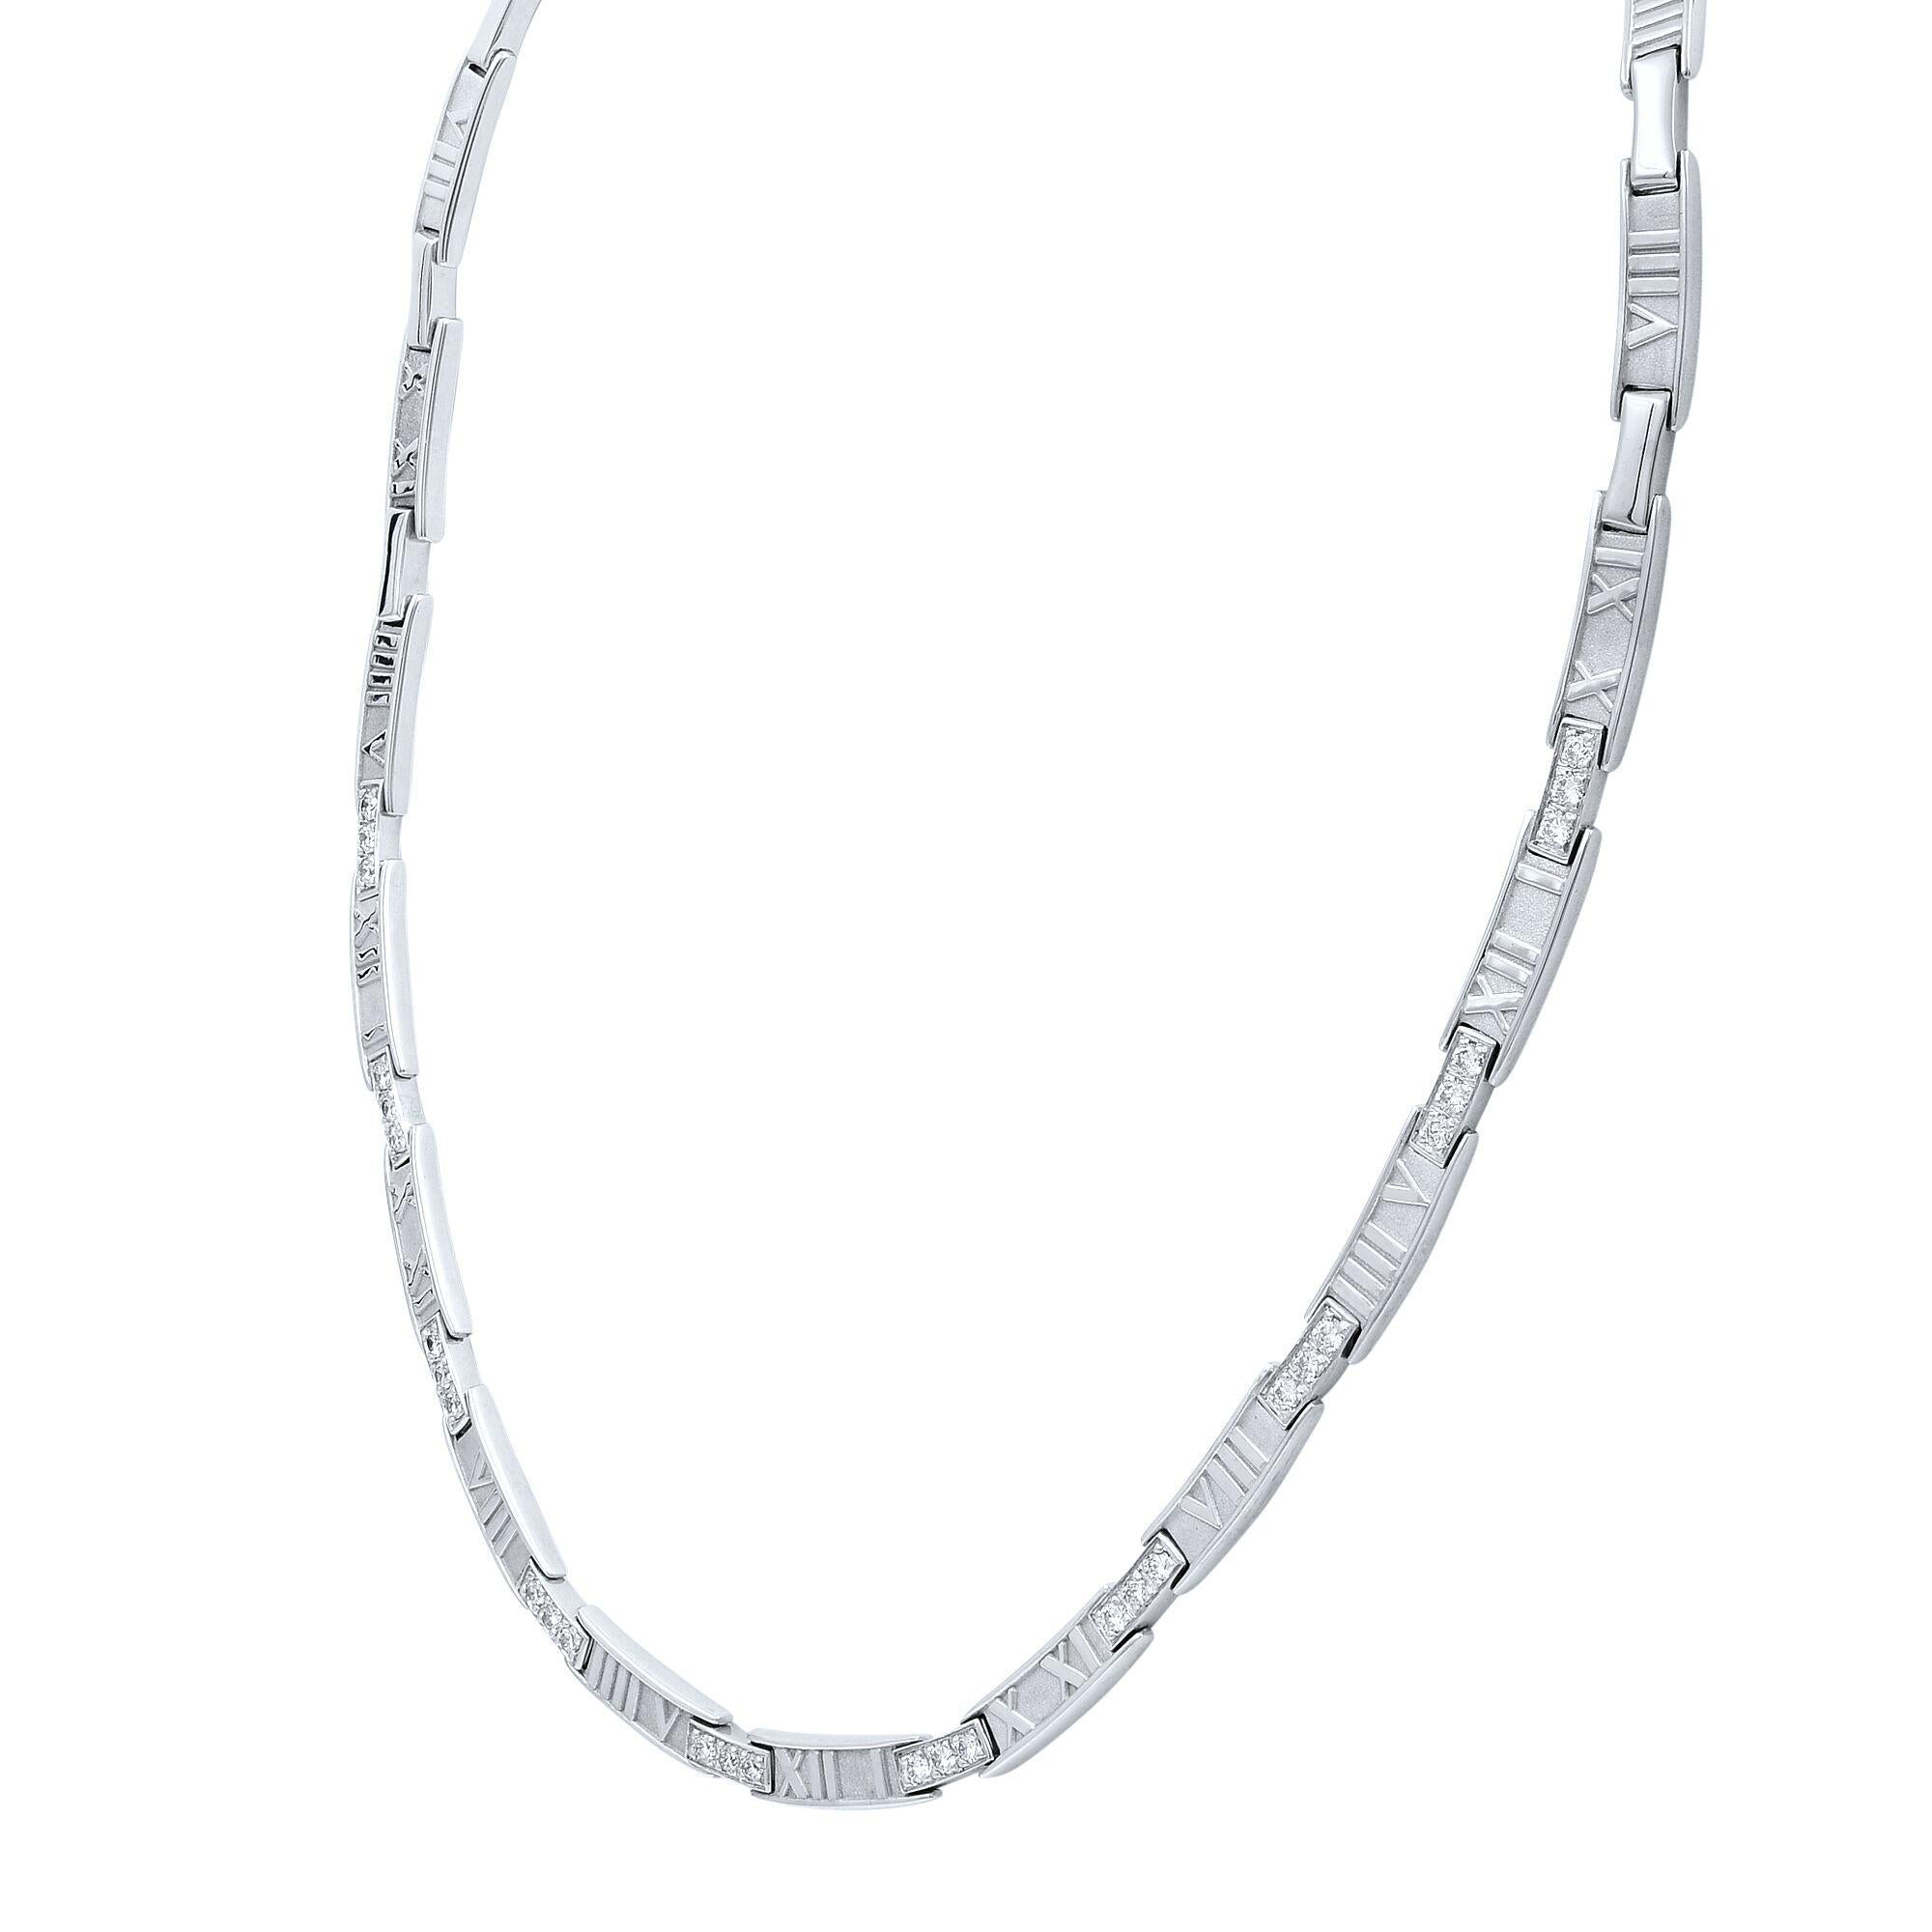 18k white gold and diamond Tiffany & Co necklace from the Atlas collection. The necklace features the atlas motif alternating with plain white gold bars half way down, the other half has 3 round brilliant cut diamonds in a pave setting with an